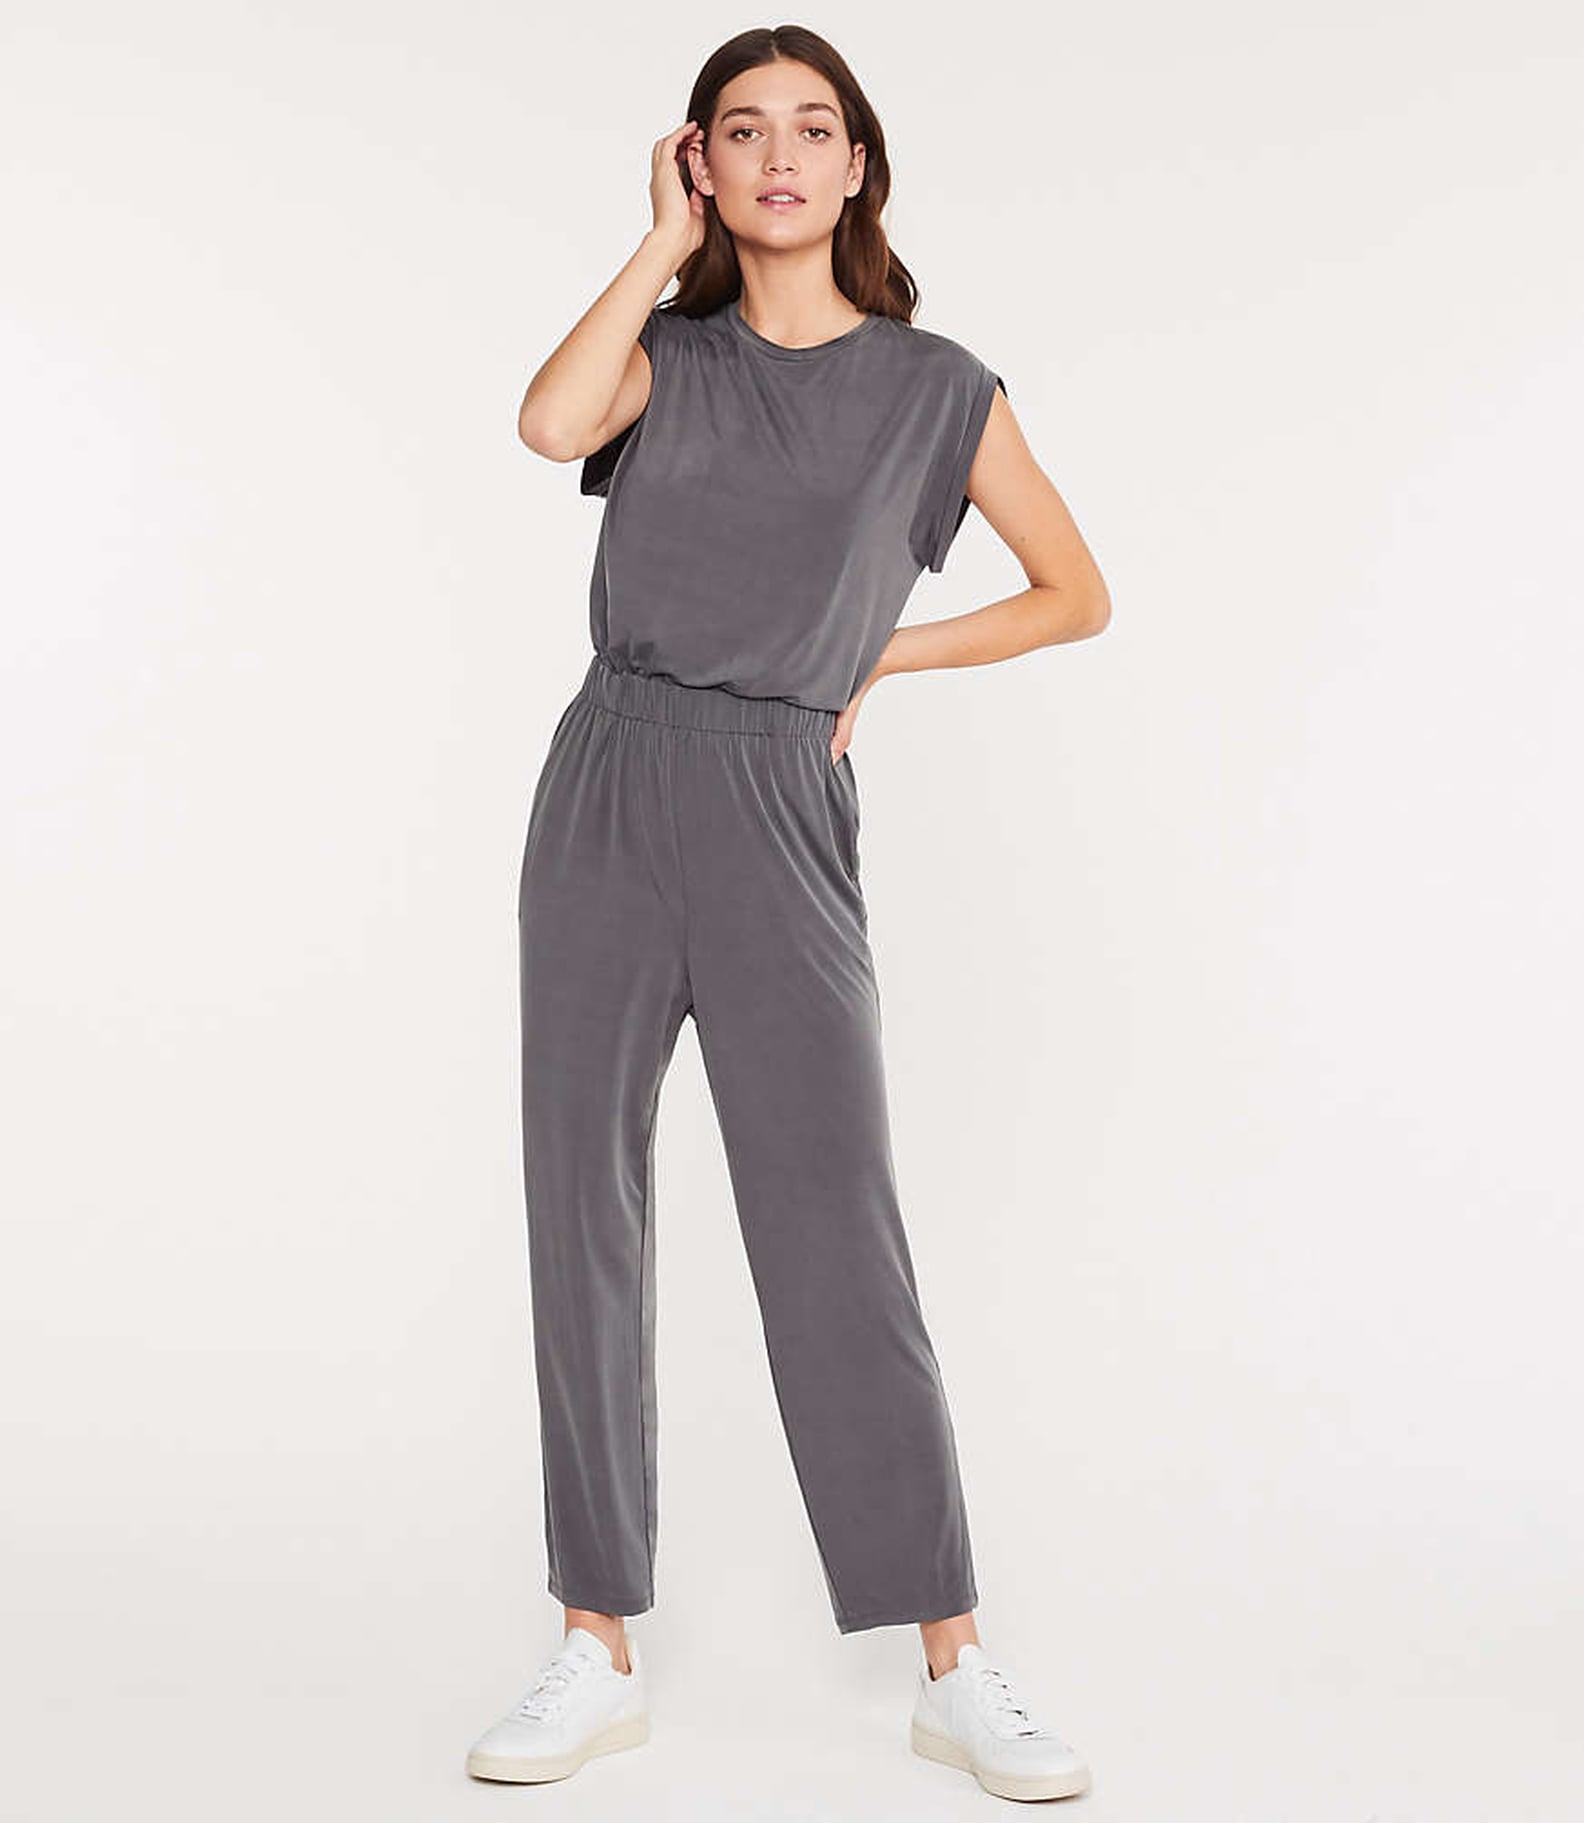 Comfortable Jumpsuits and Rompers to Wear at Home | POPSUGAR Fashion